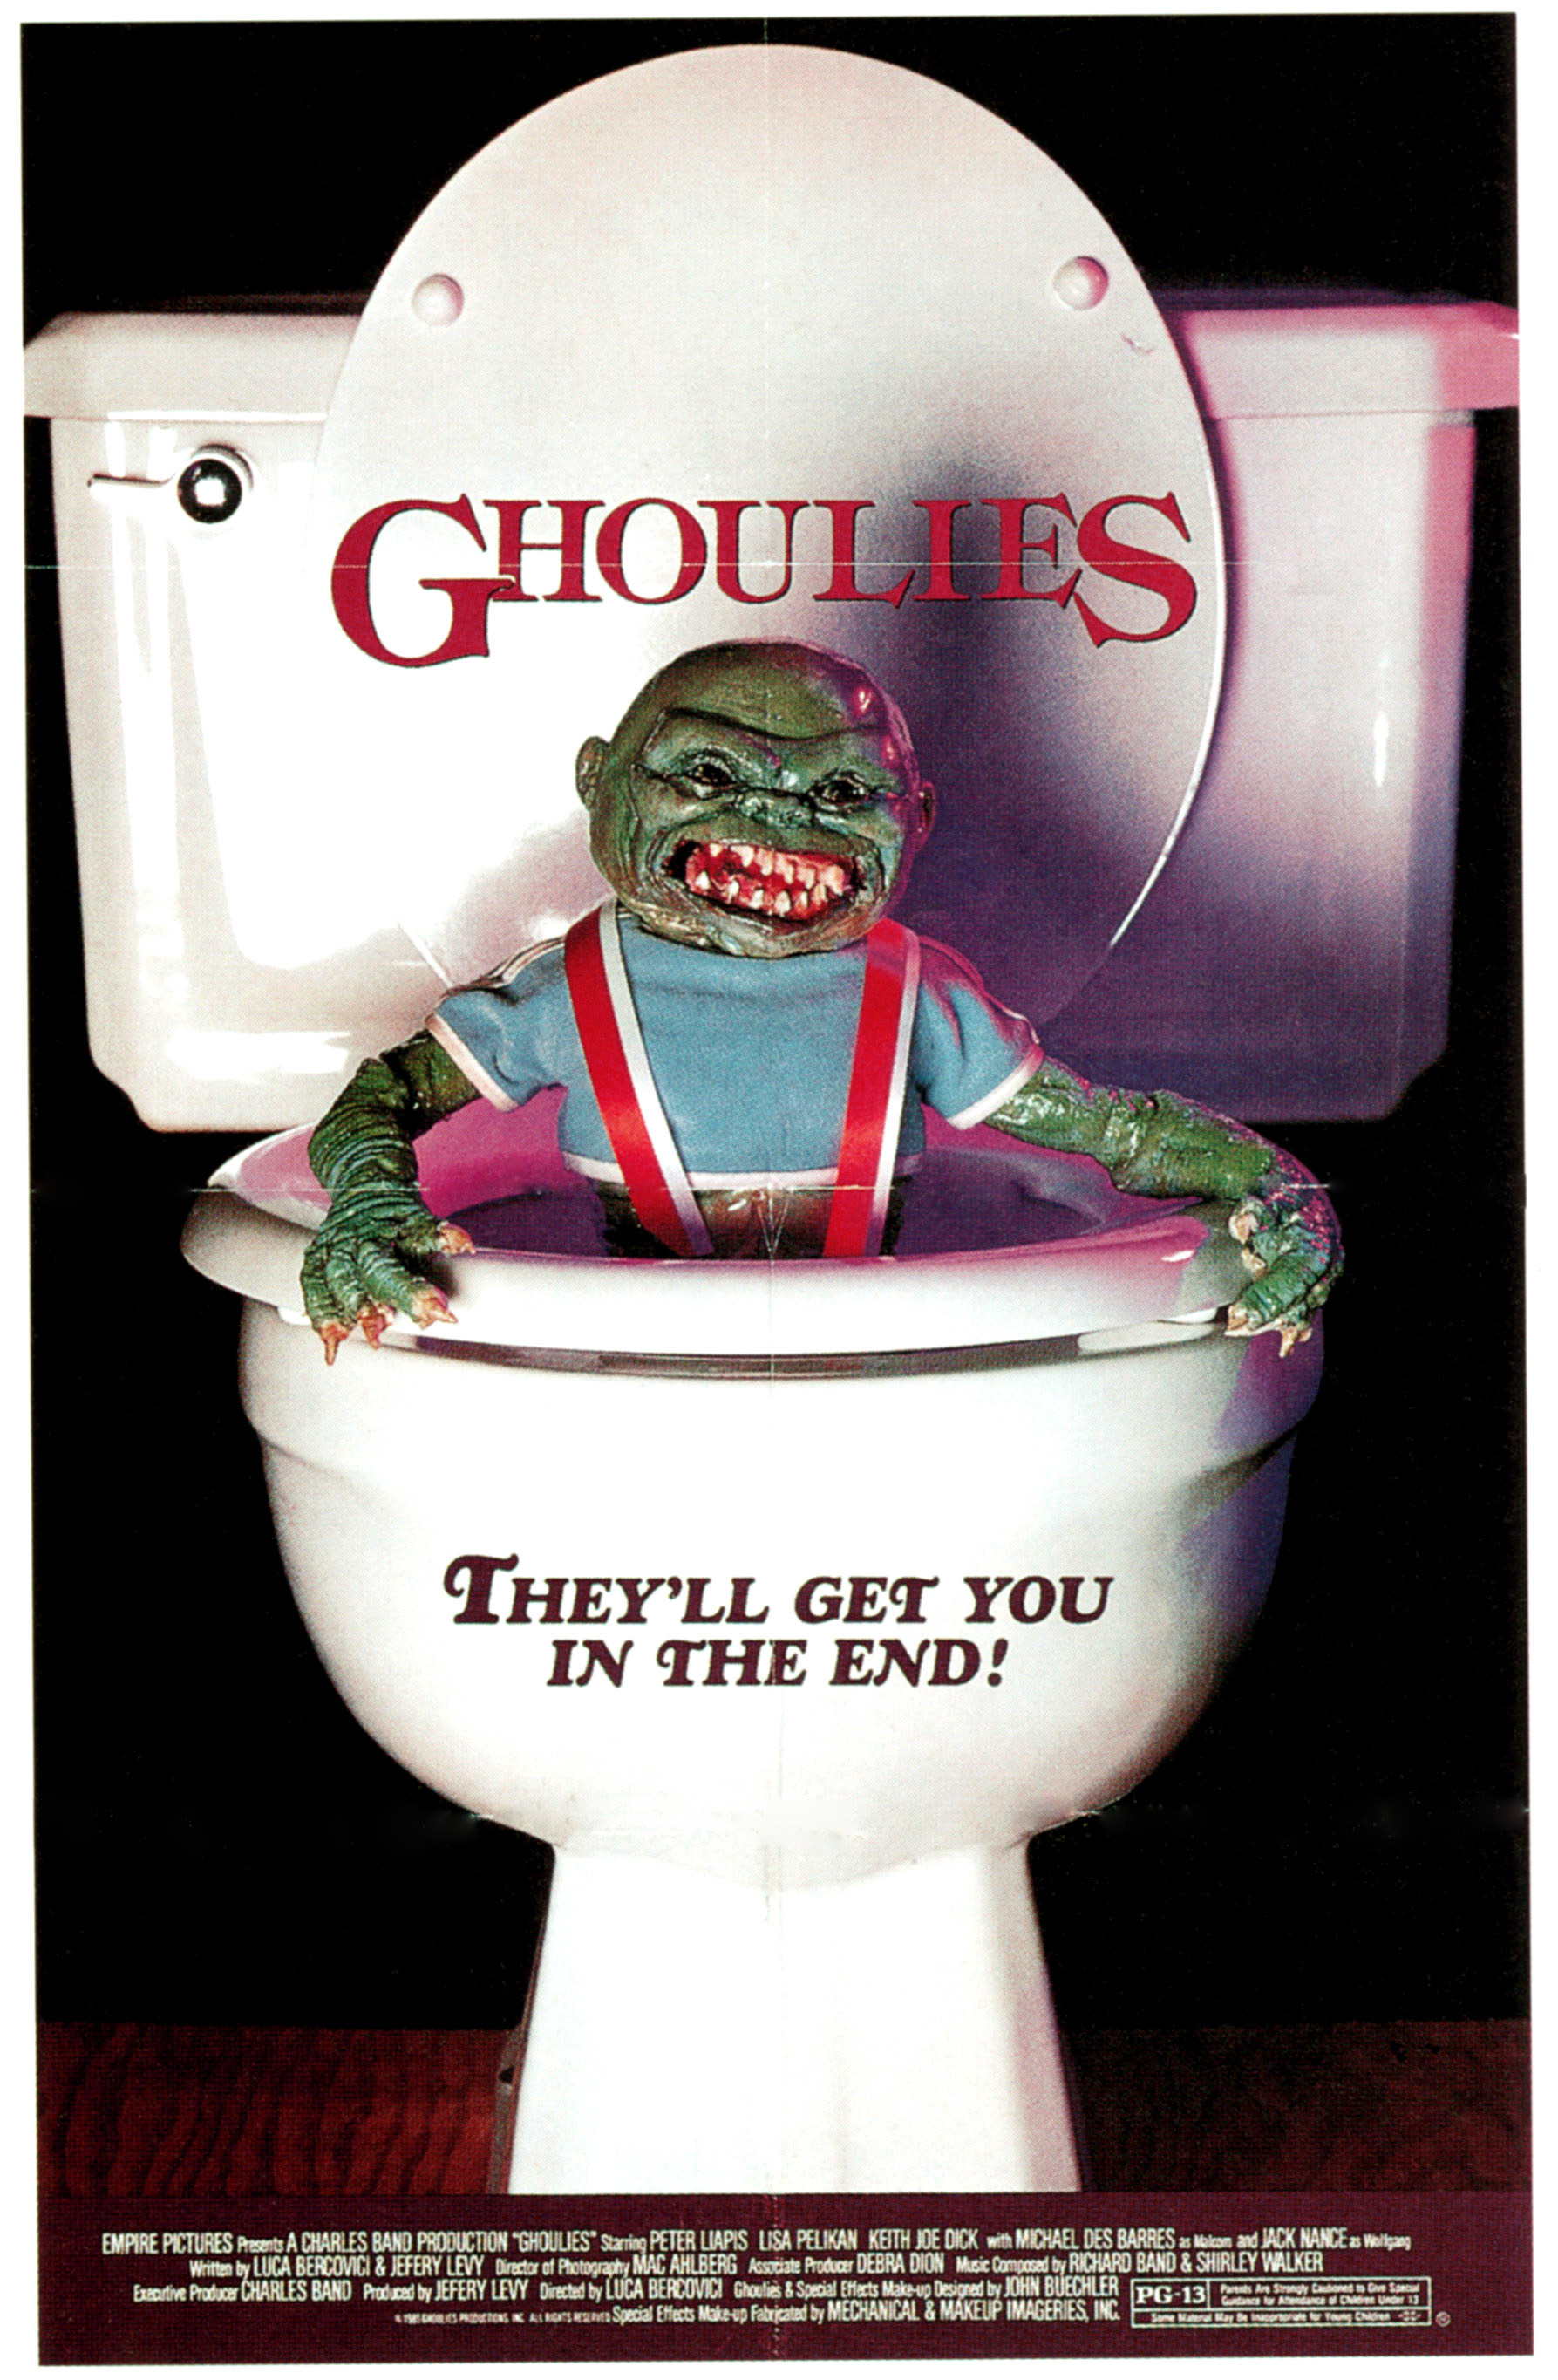 The official poster for &quot;Ghoulies&quot; which features a terrifying green creature coming out of a toilet